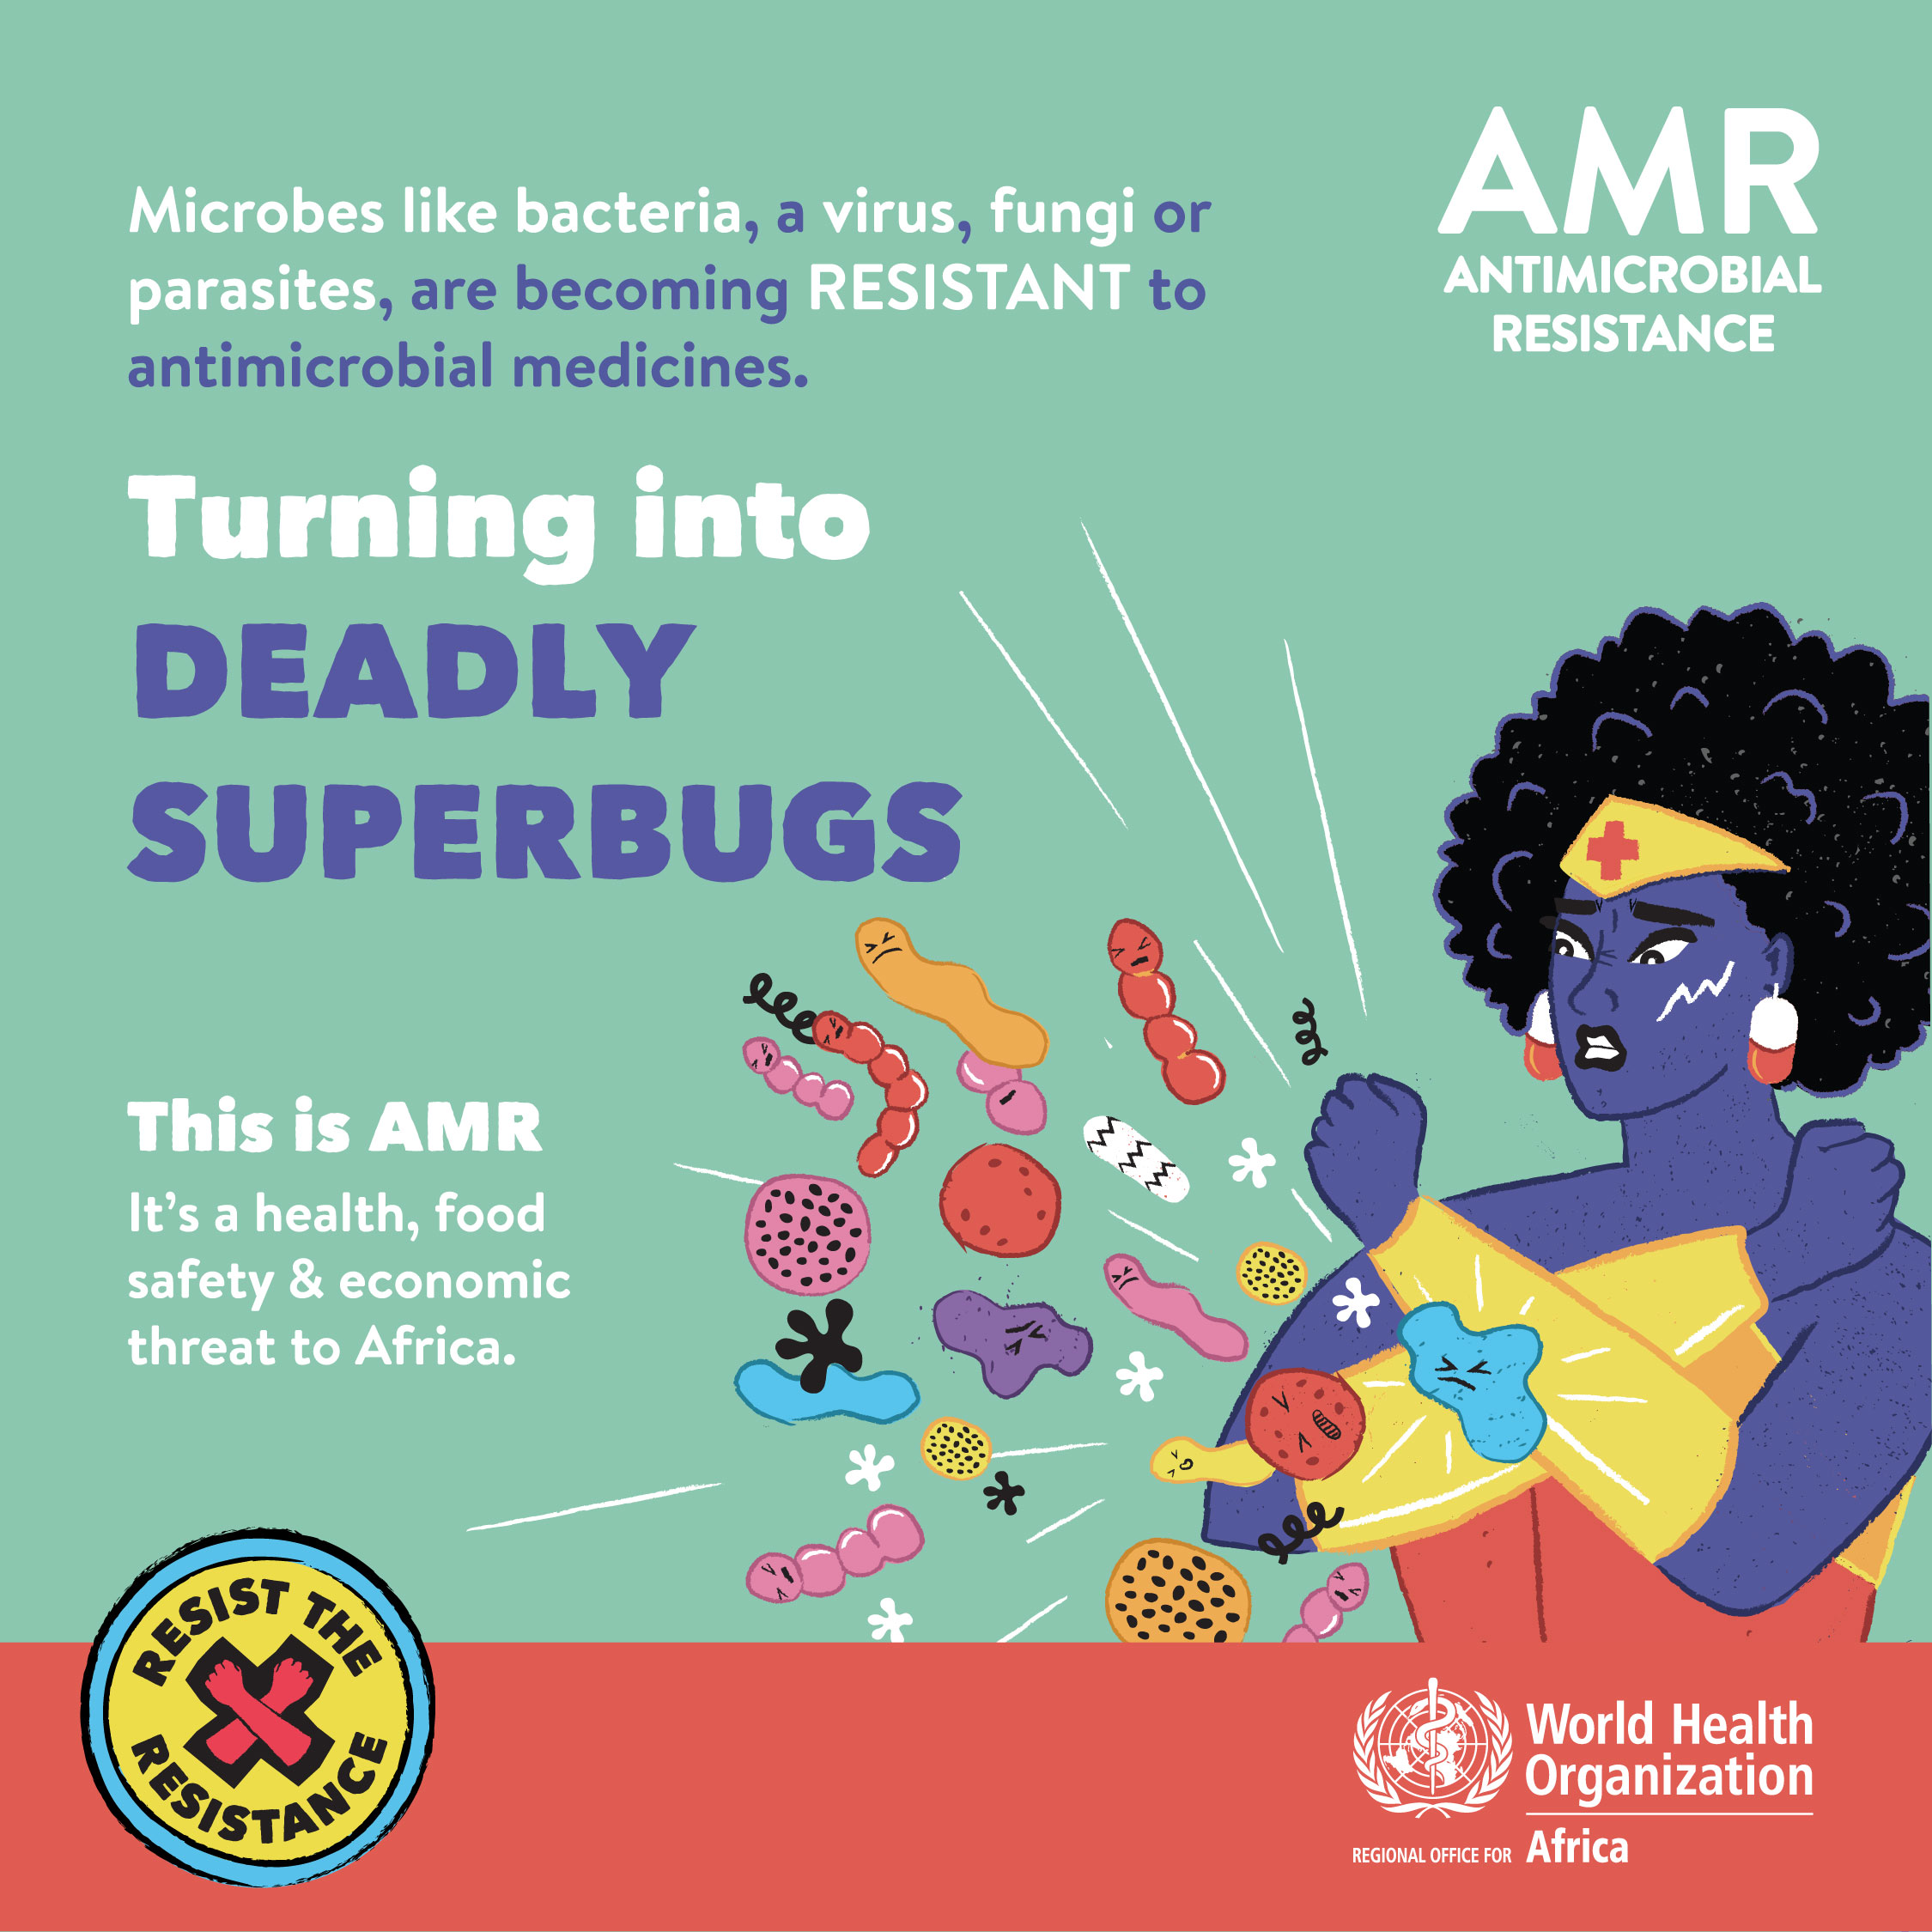 AMR Frontline Workshop for medical students to deep dive into Infection  Control and AMR surveillance - Superheroes Against Superbugs